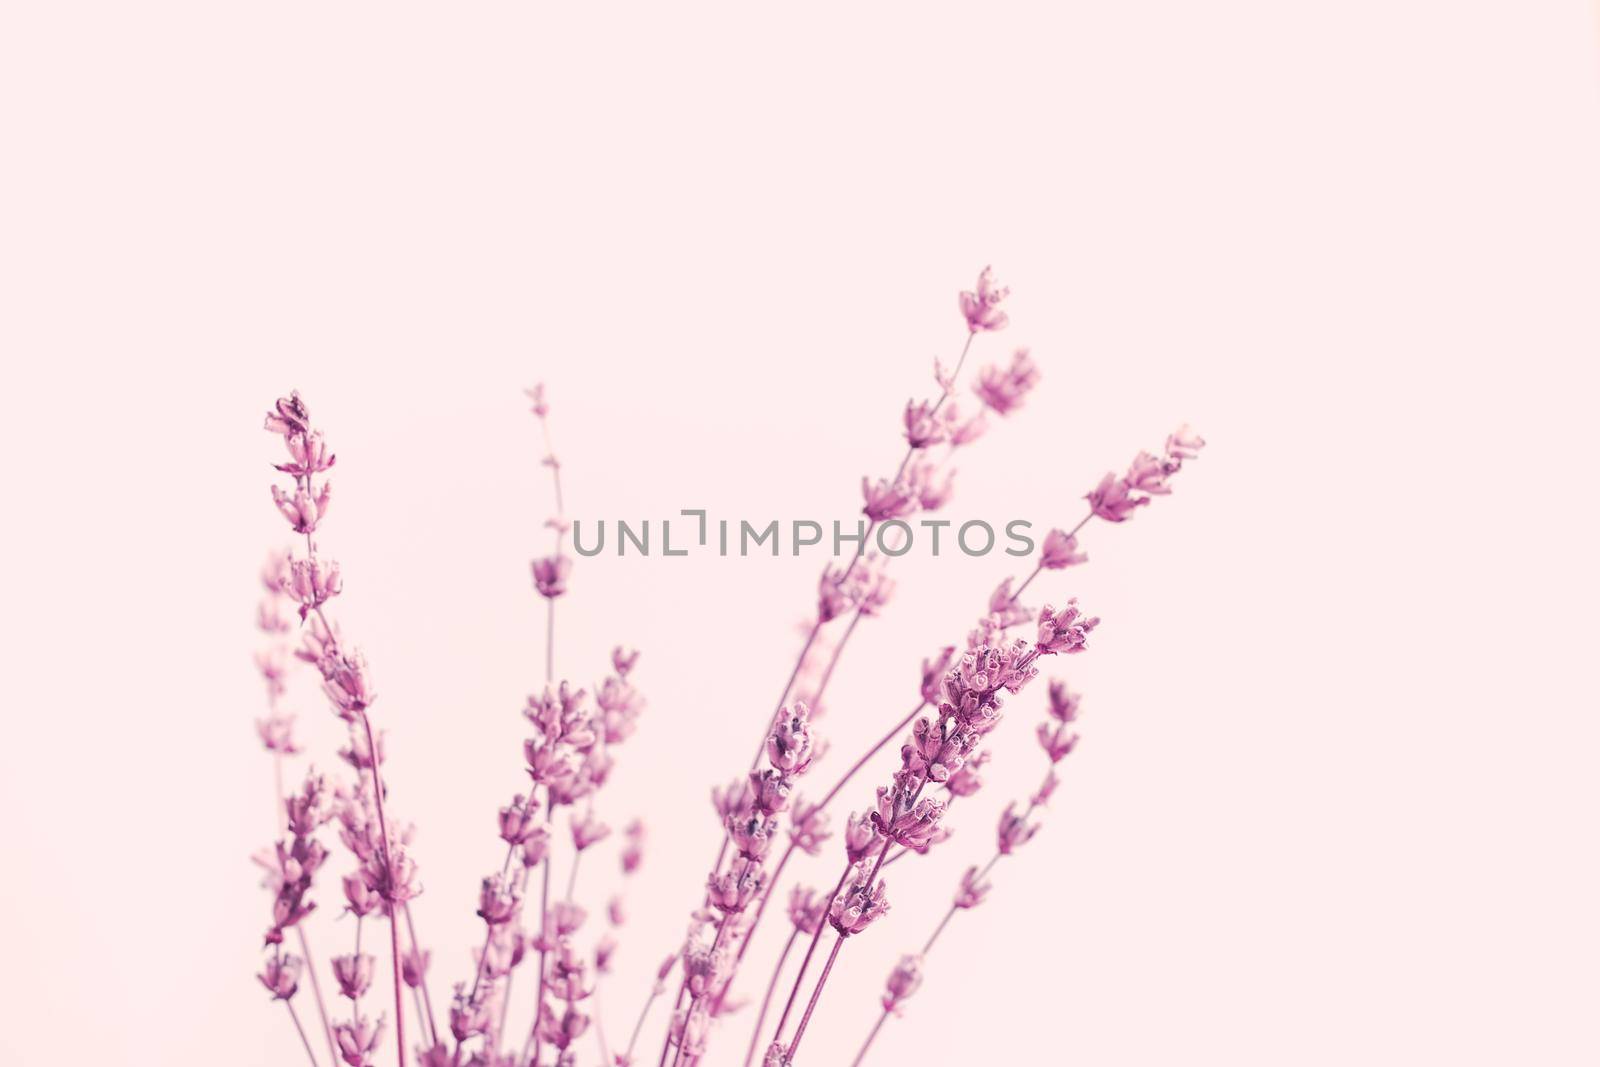 Dried lavender flowers arranged on bright purple background